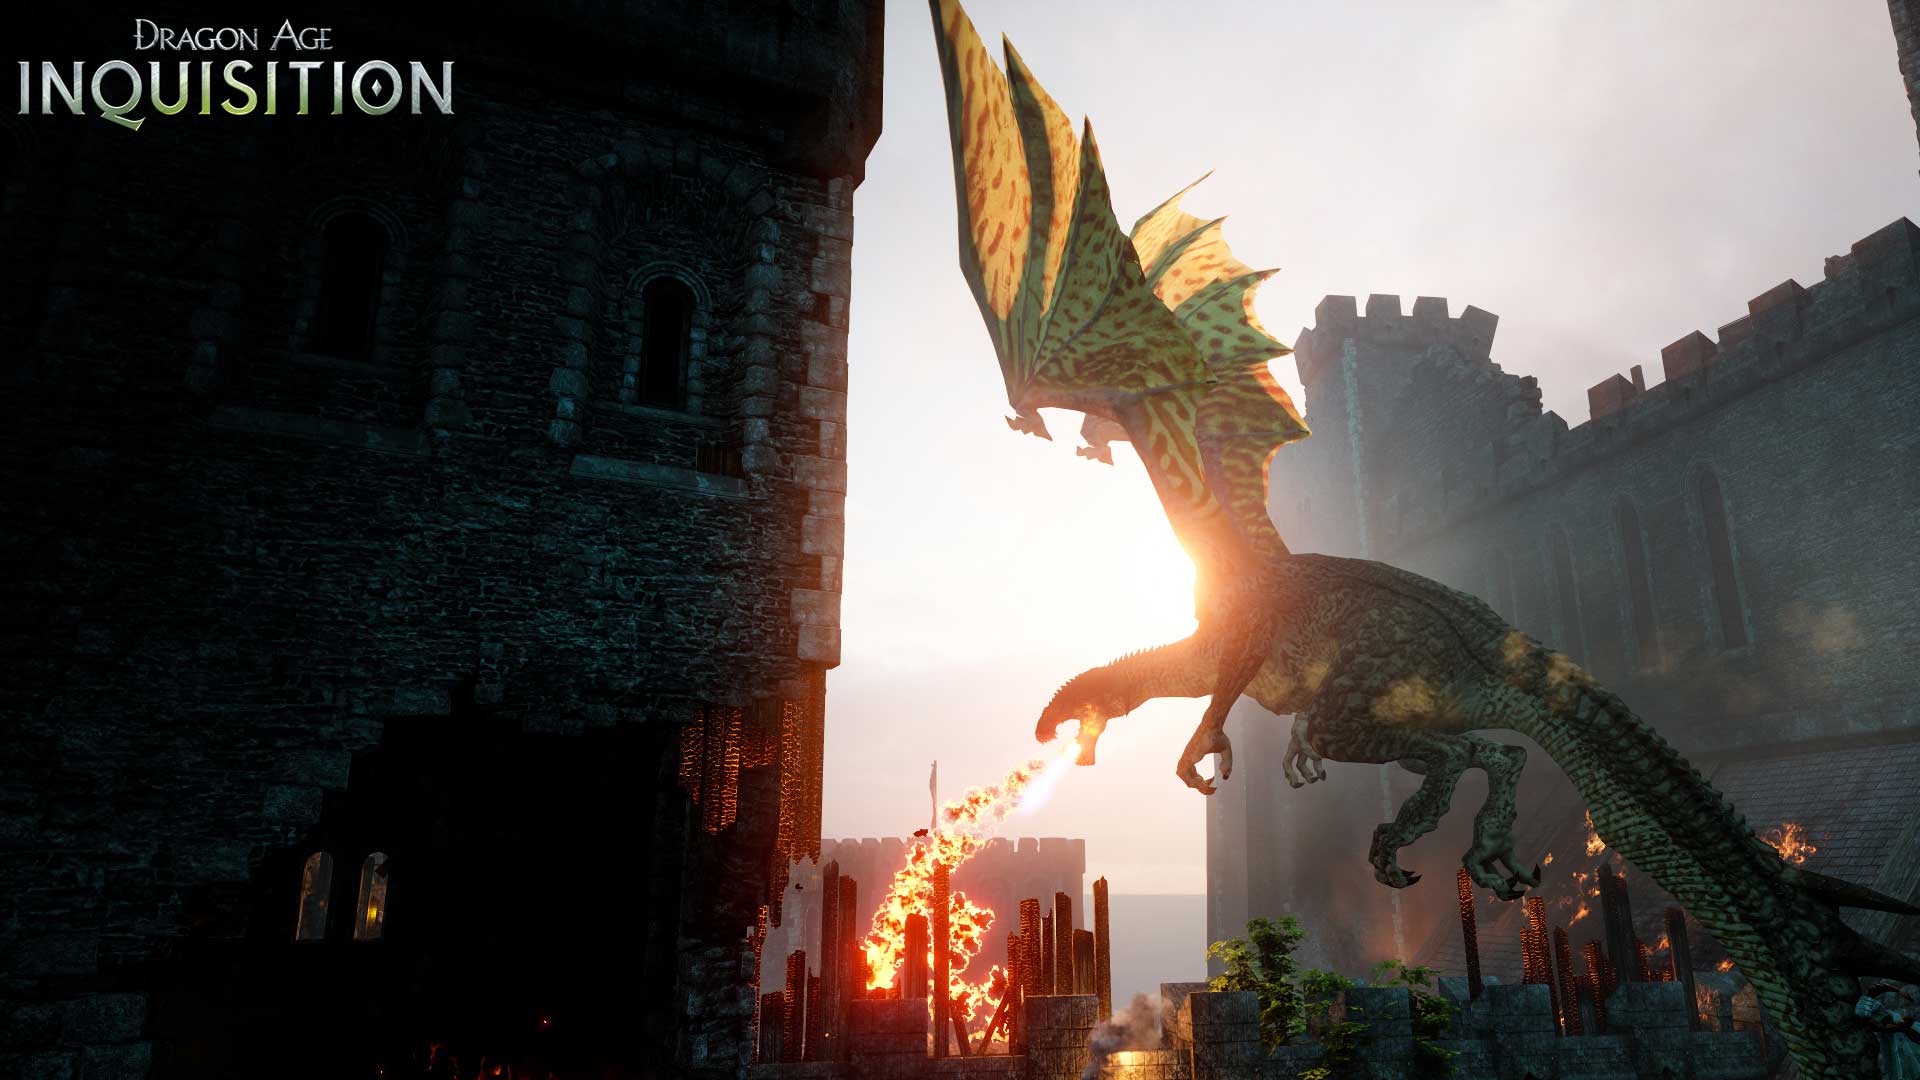 Image for Dragon Age: Inquisition - Dragonslayer DLC announced, free to all this week